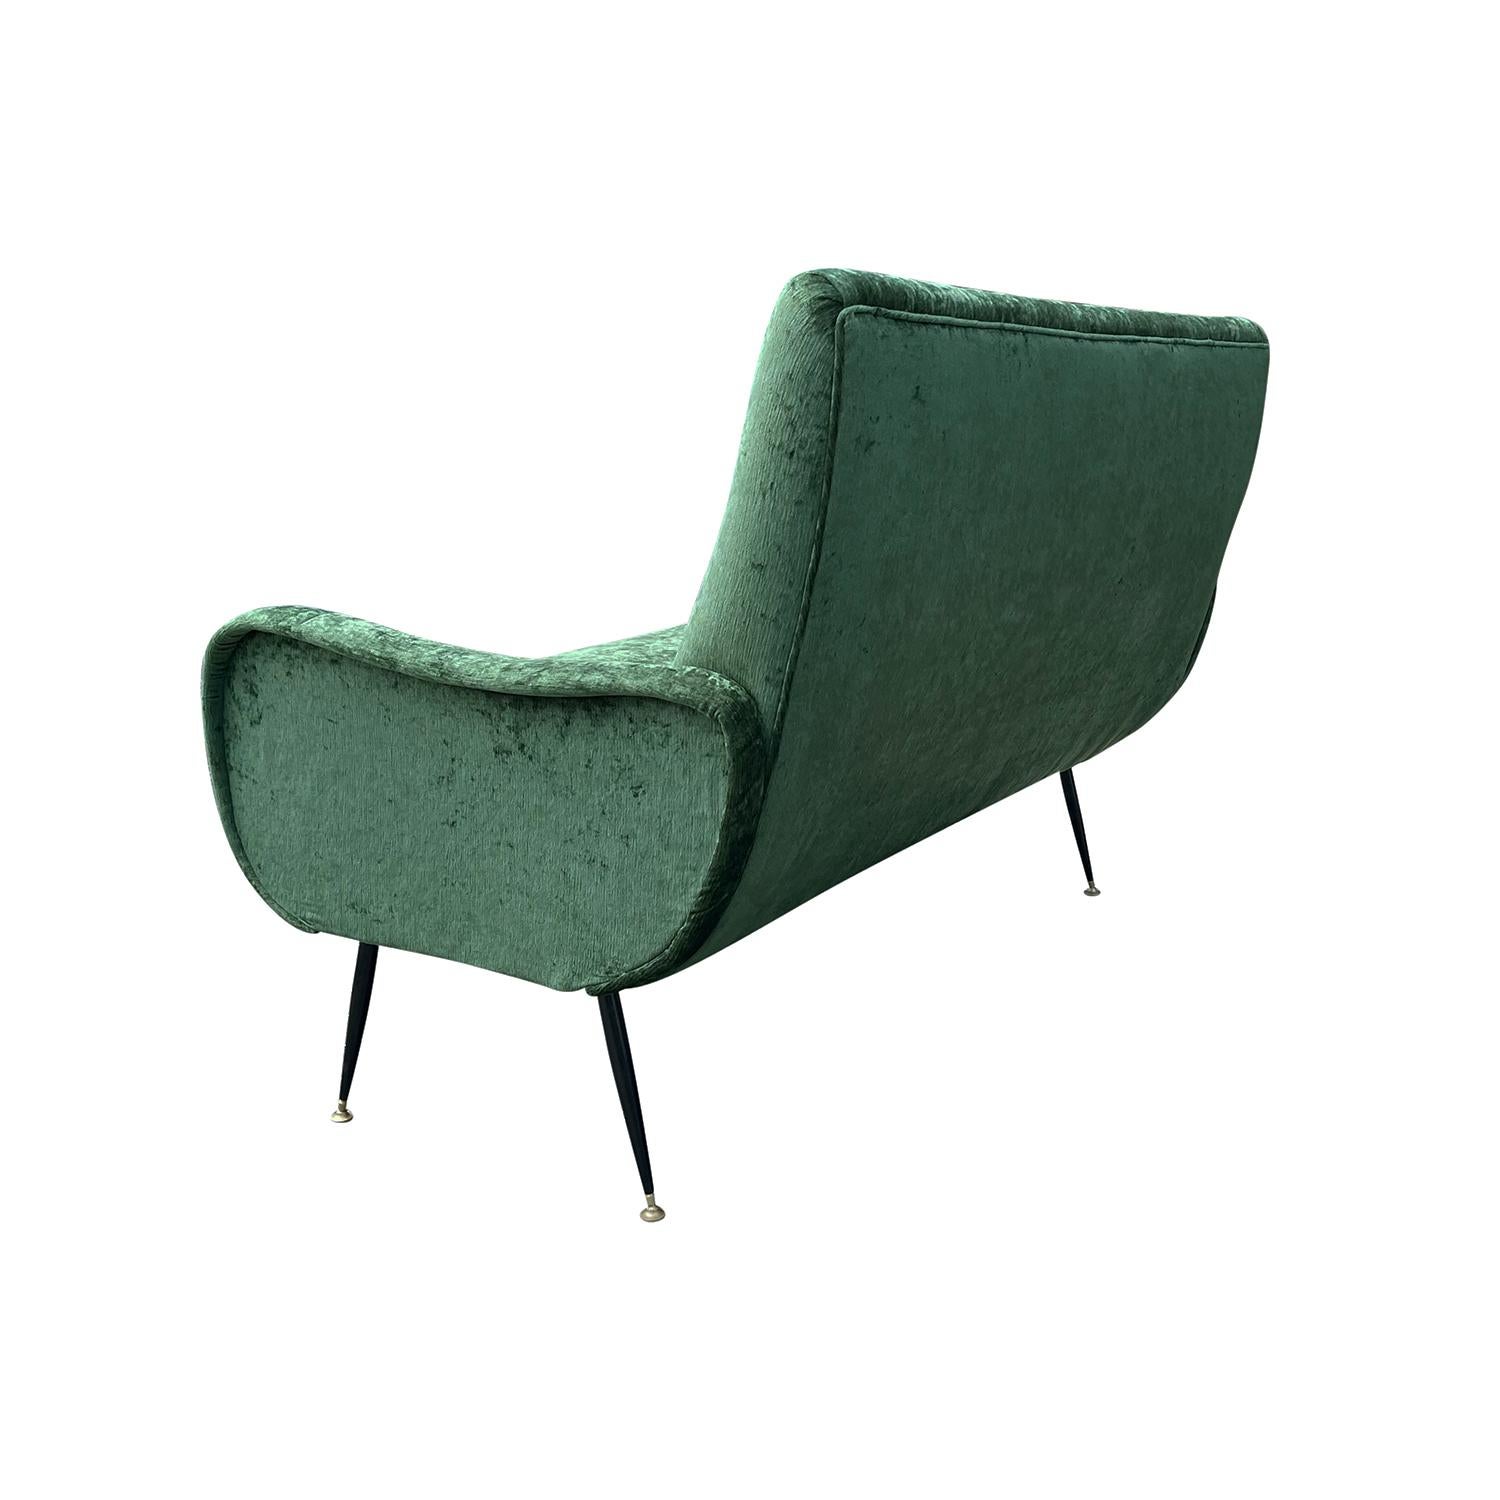 Hand-Crafted 20th Century Green Italian Small Two Seater Sofa, Iron Settee by Marco Zanuso